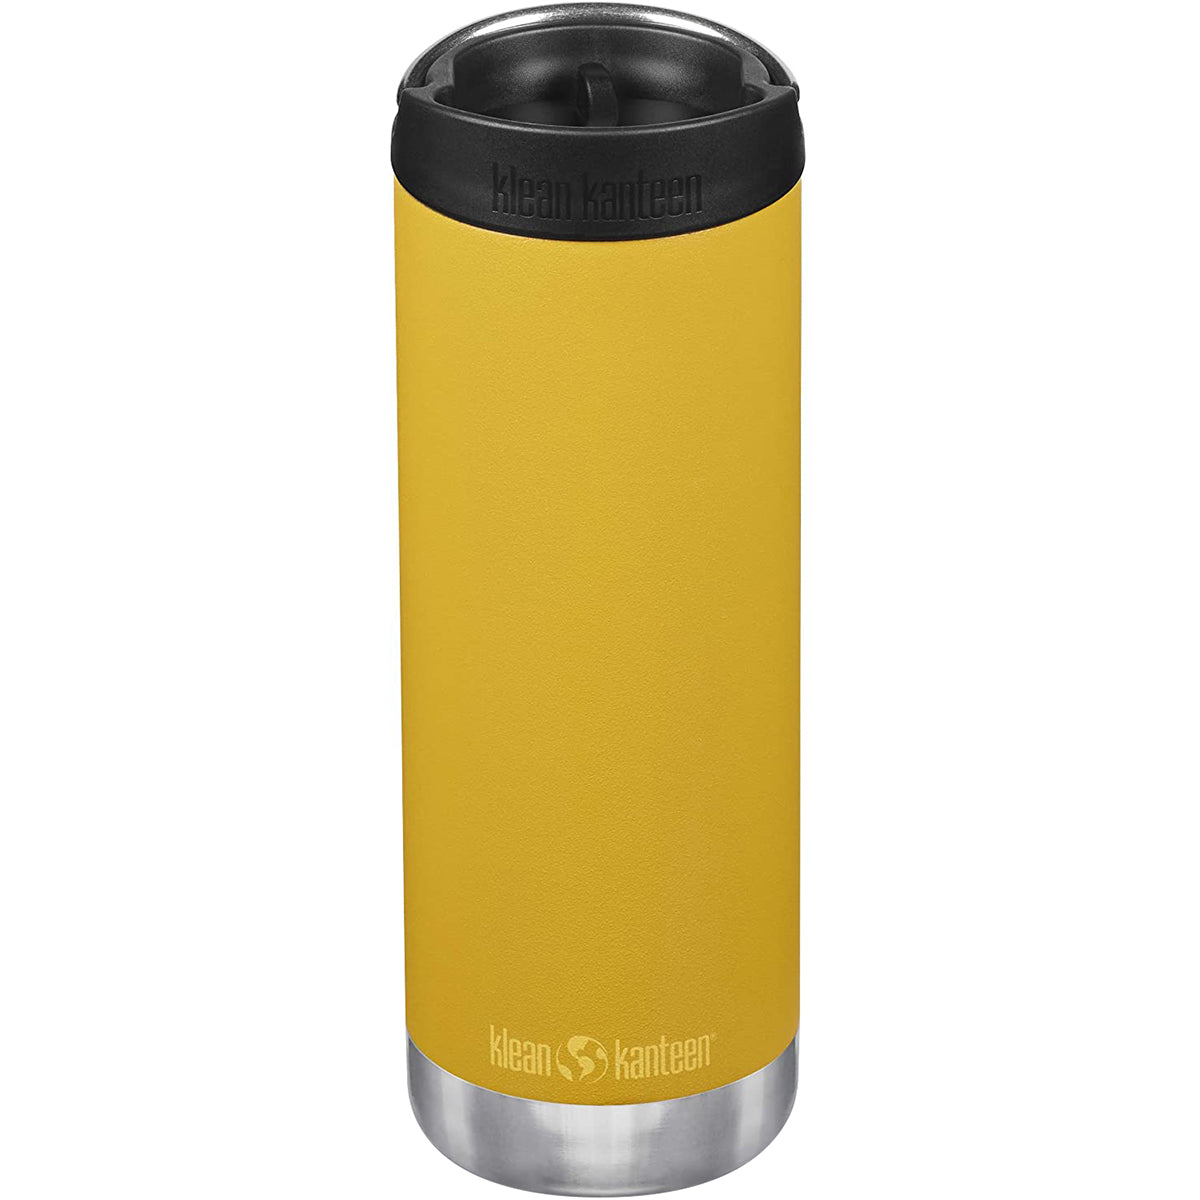 Klean Kanteen 16 oz. TKWide Insulated Stainless Steel Bottle with Cafe Cap Klean Kanteen